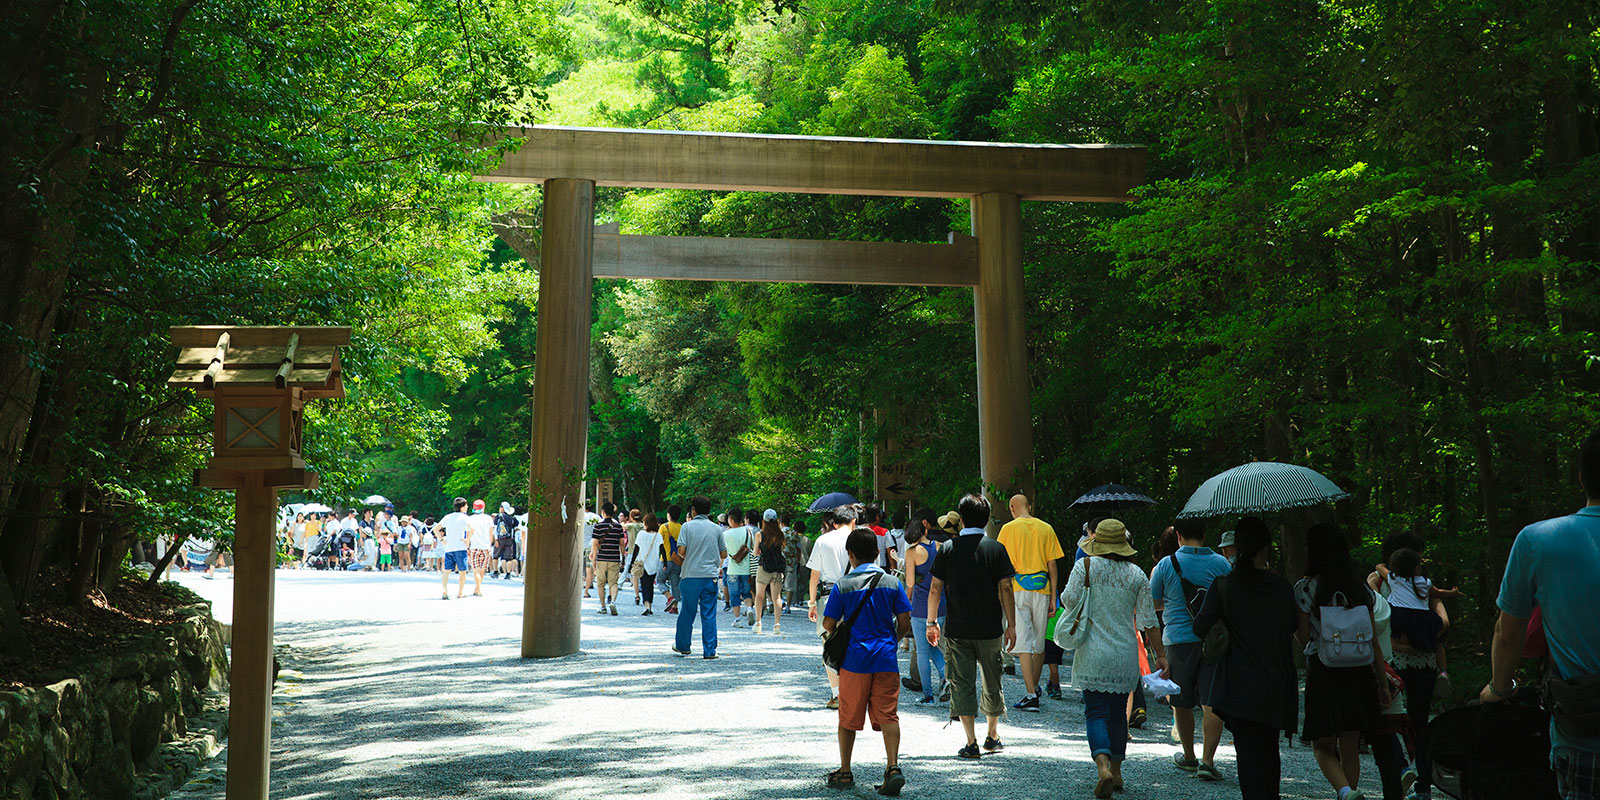 Approximately eight million people come to Ise Grand Shrine every year | Keisuke Tanigawa